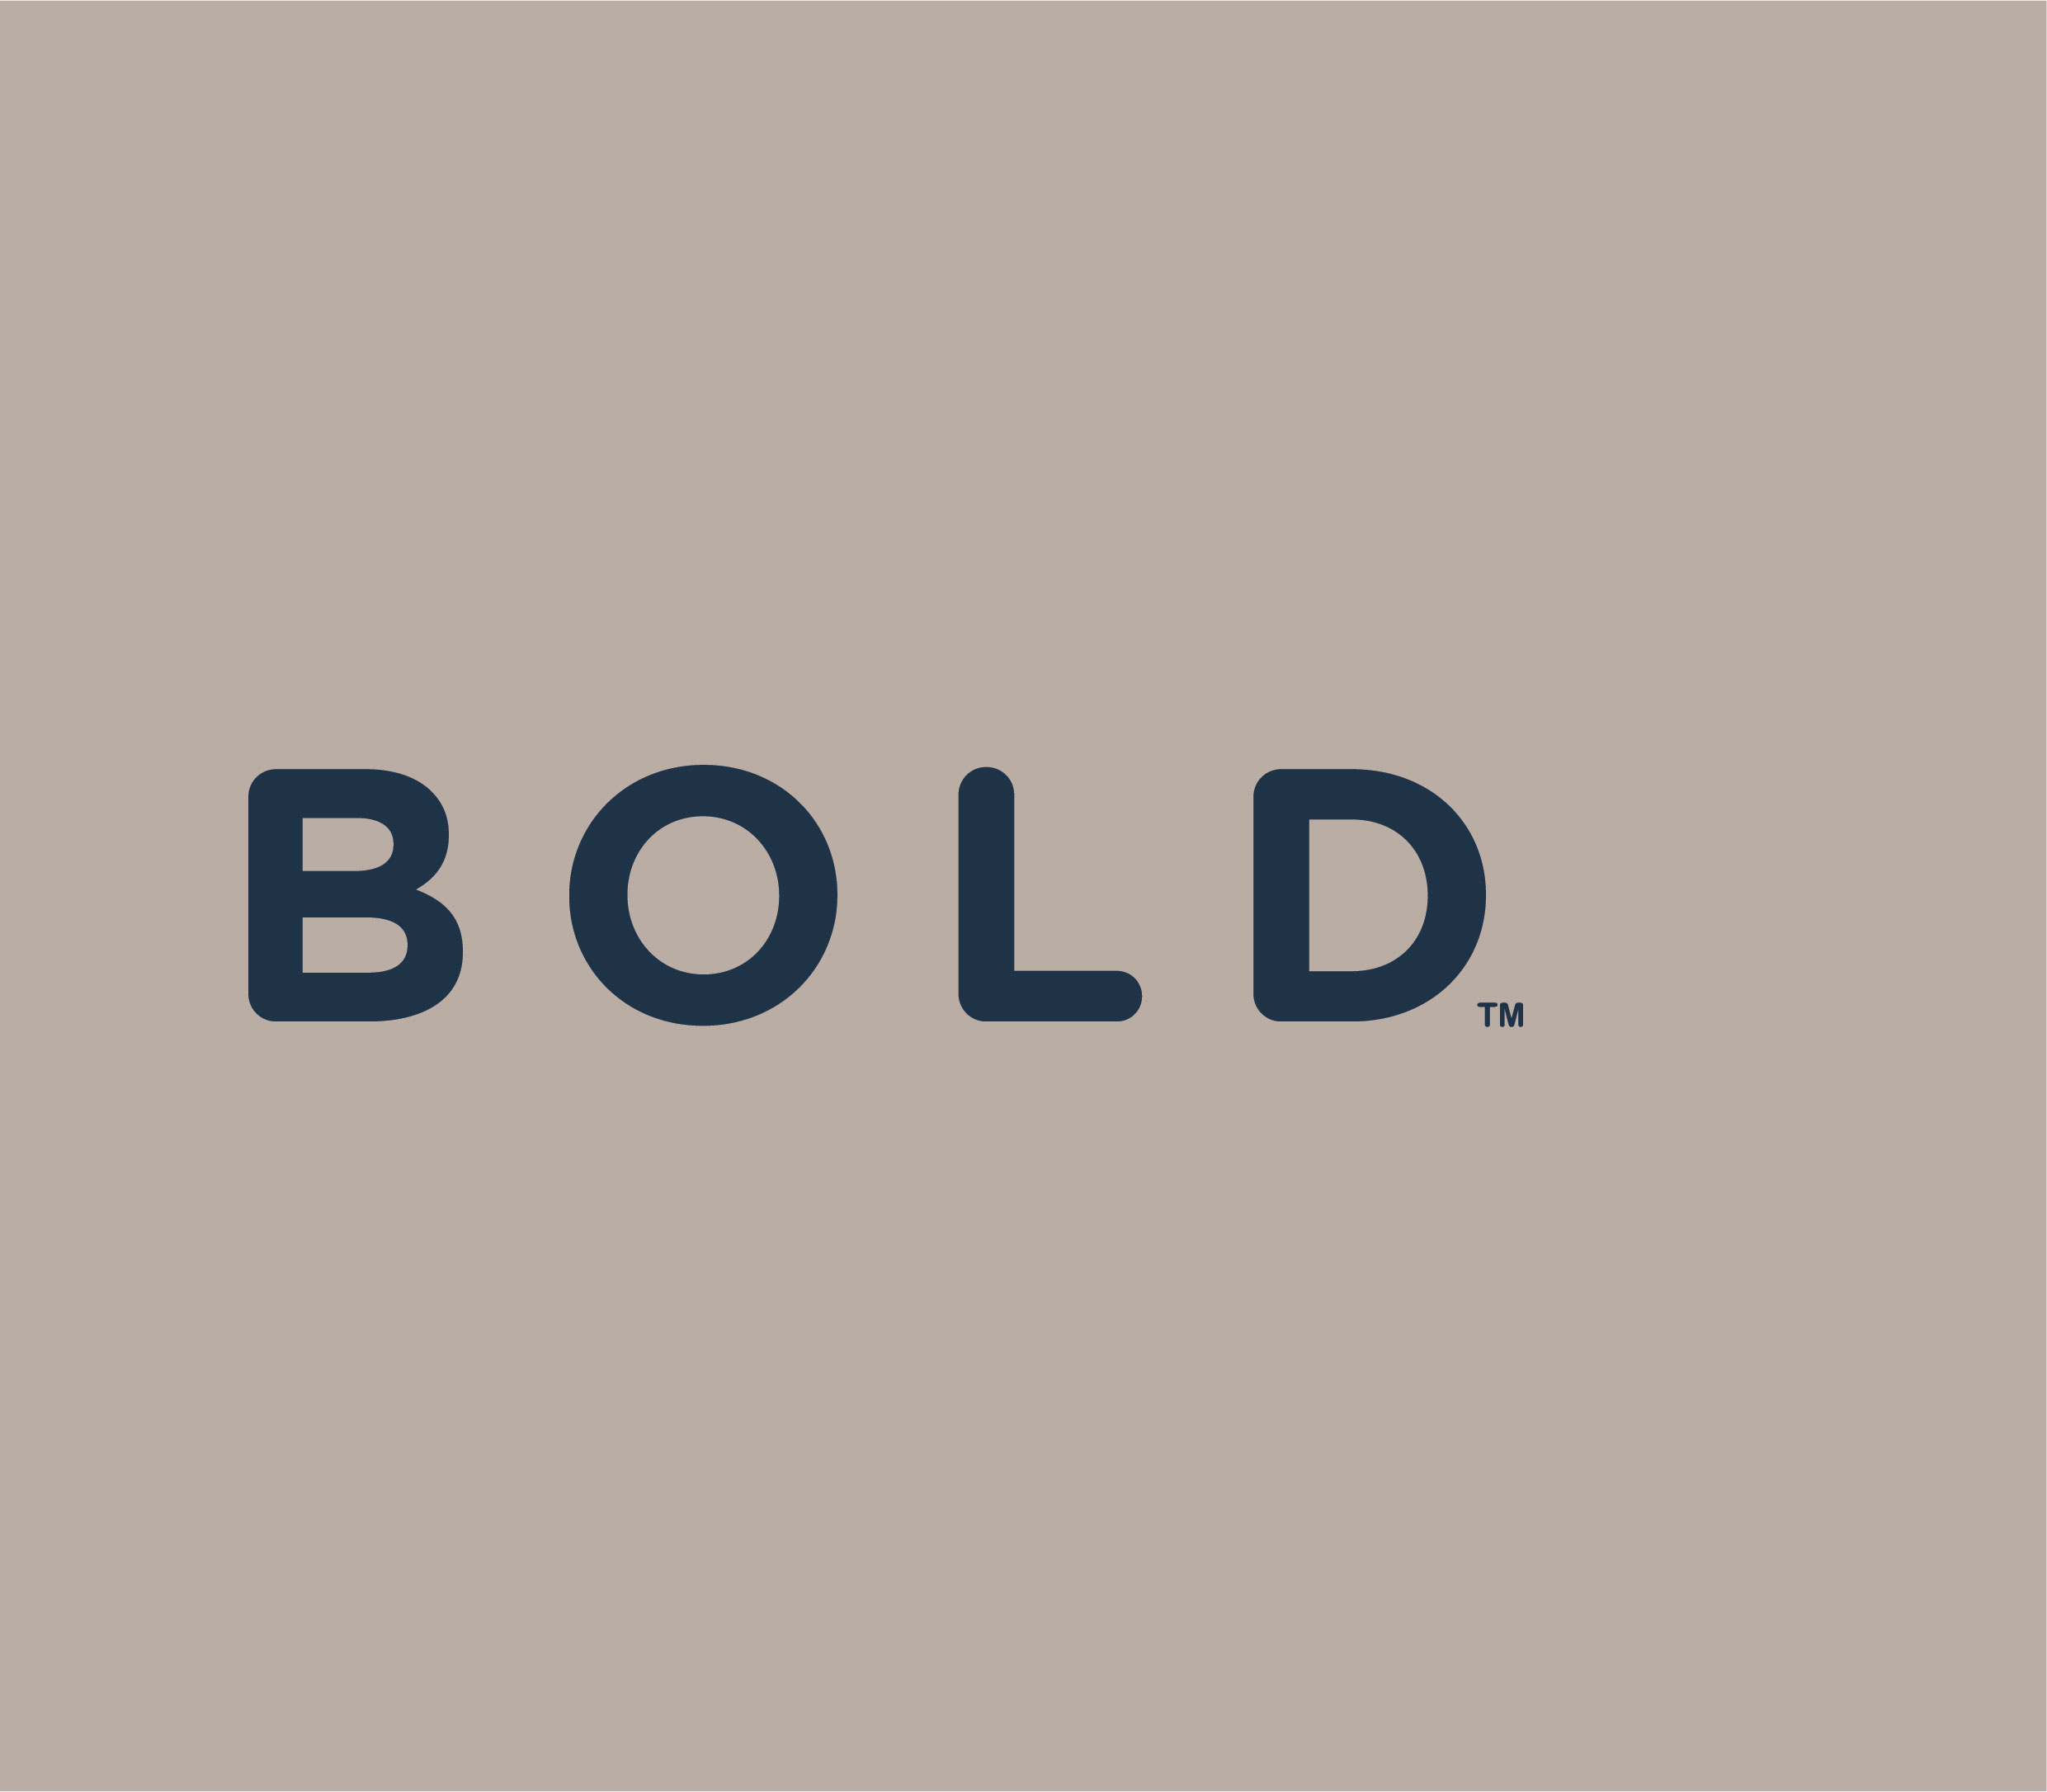 Ryan Peck launches Bold new material handling firm